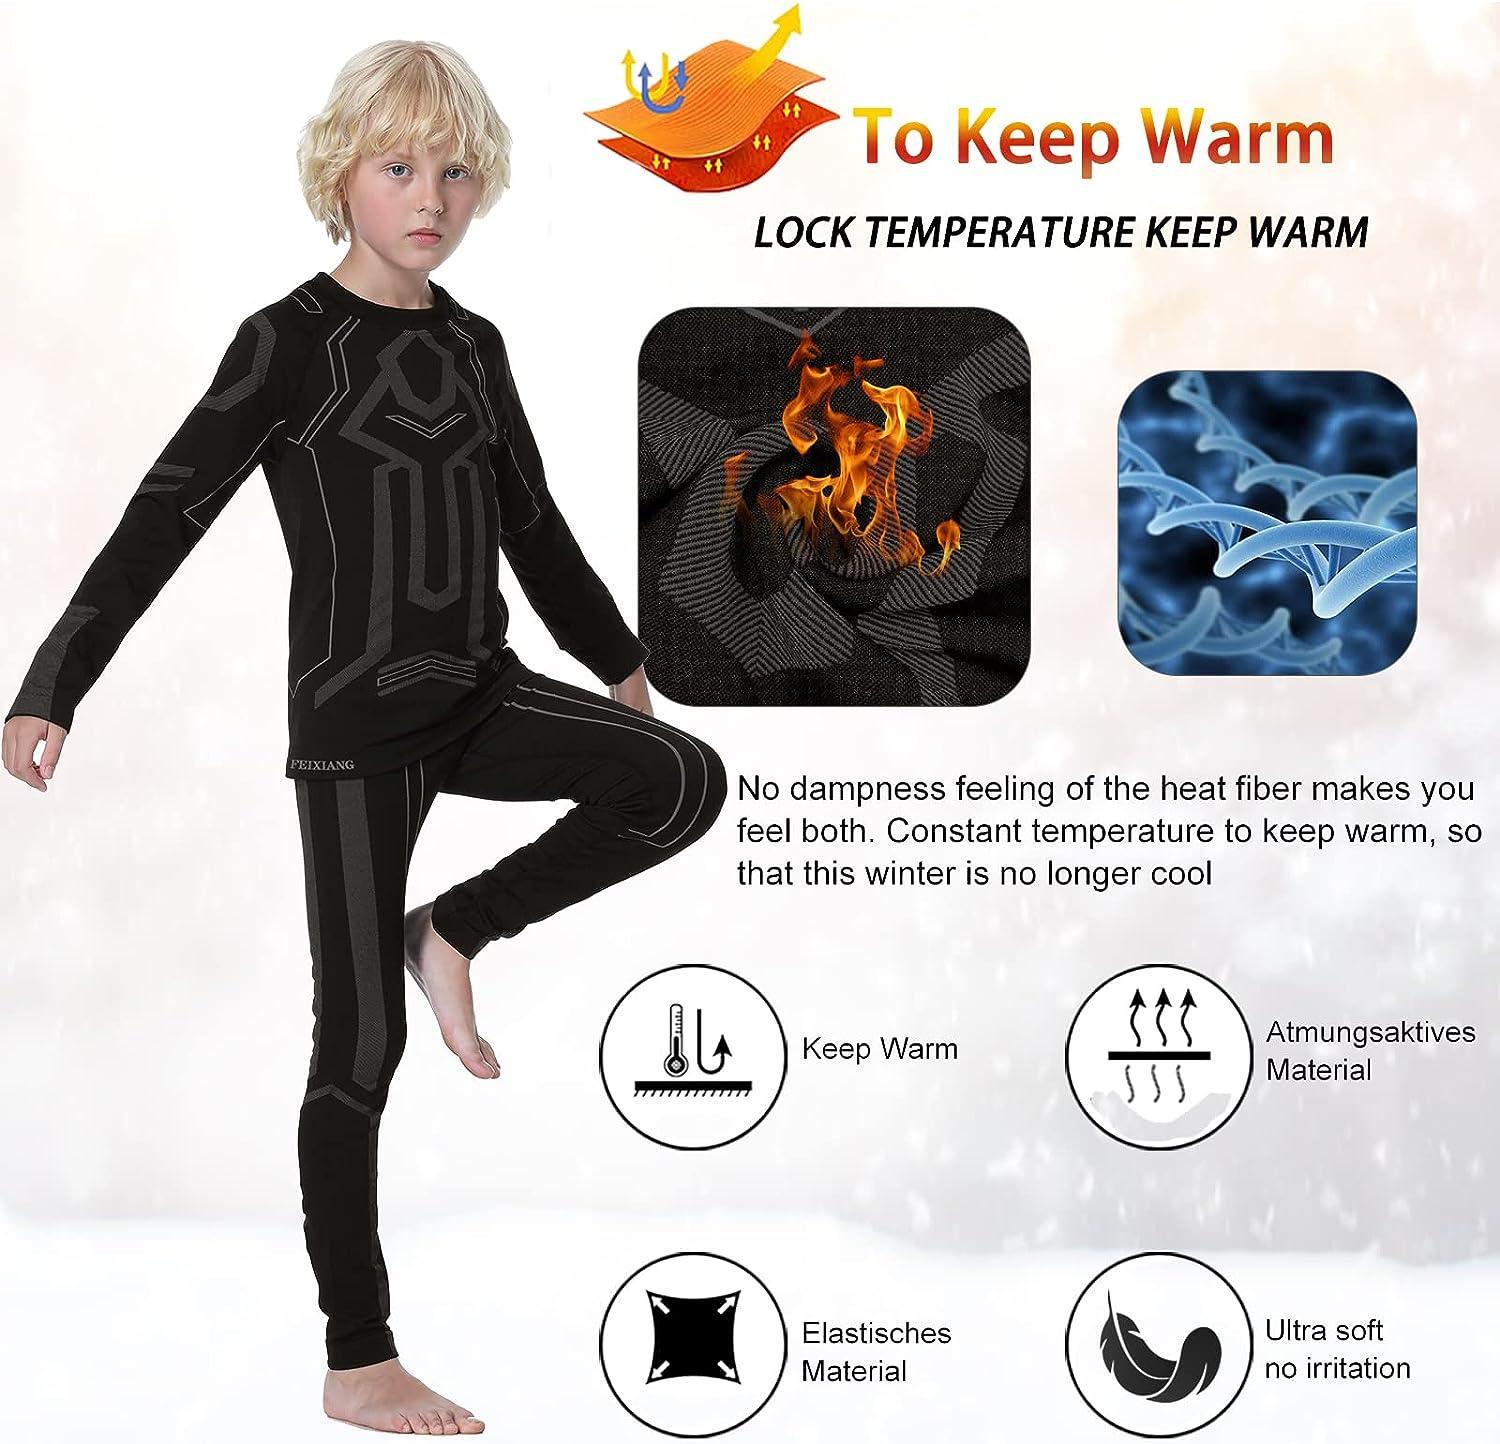 Mænd - Warm fibers for your winter